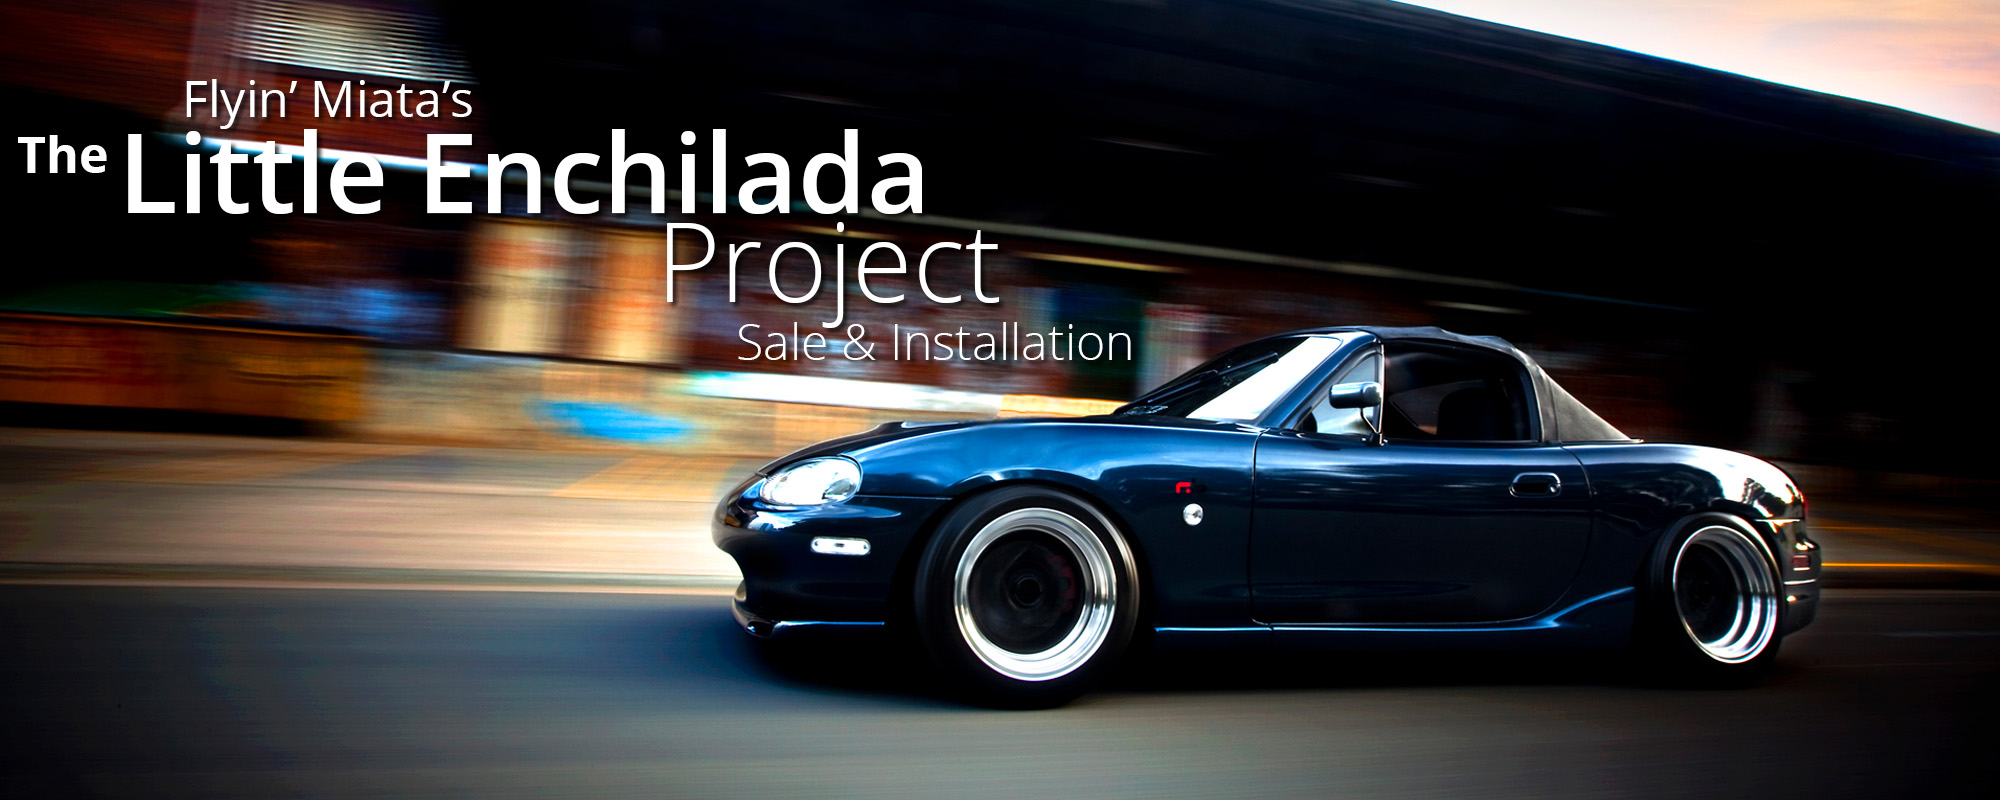 The Little Enchilada Project <a href='miata-specialists.php#tlep'>Read more</a>.